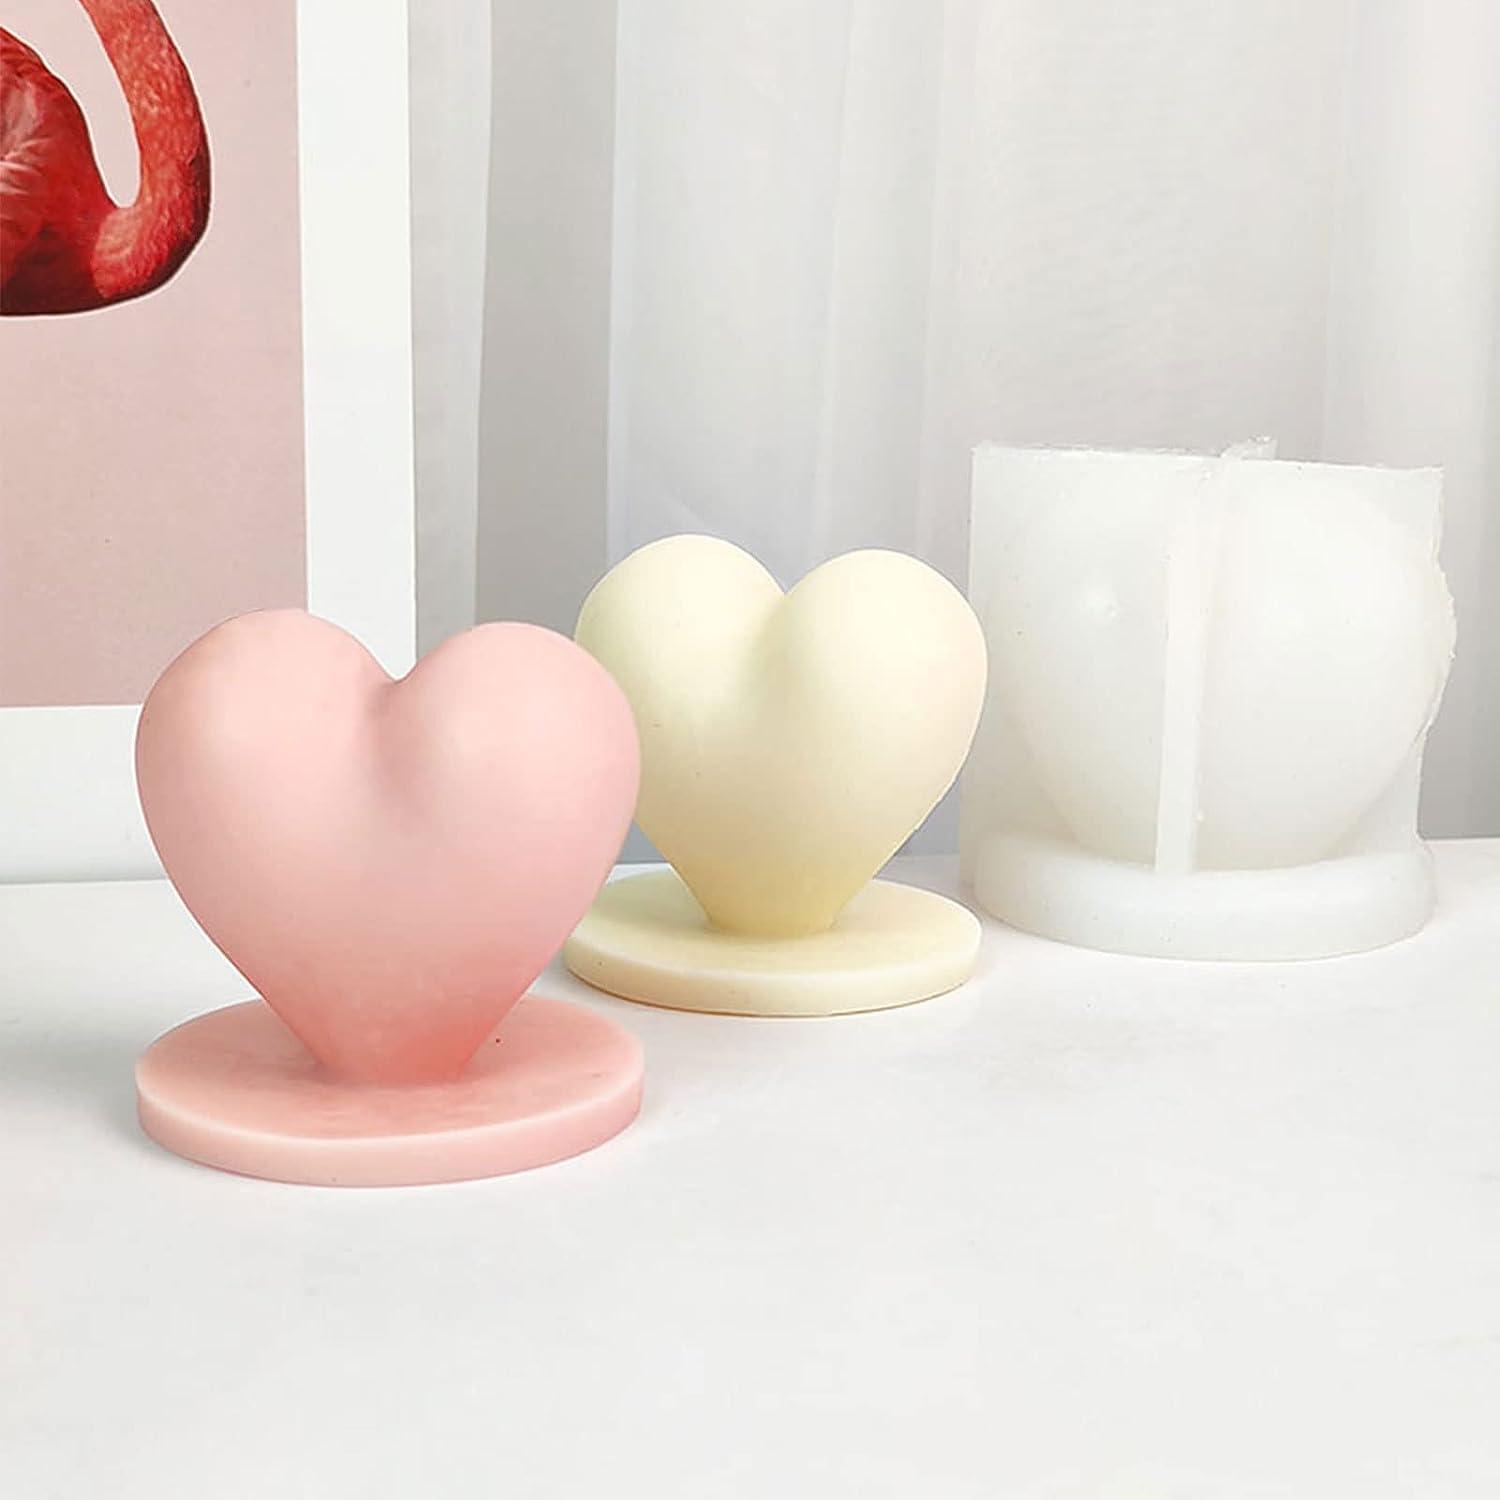 1pc 3D Heart Resin Mold, Grids Love Heart Silicone Mold for Candle Soap  Making, Woven Love Epoxy Mold for DIY Heart Bath Bomb Fondant Chocolate  Cake Decor